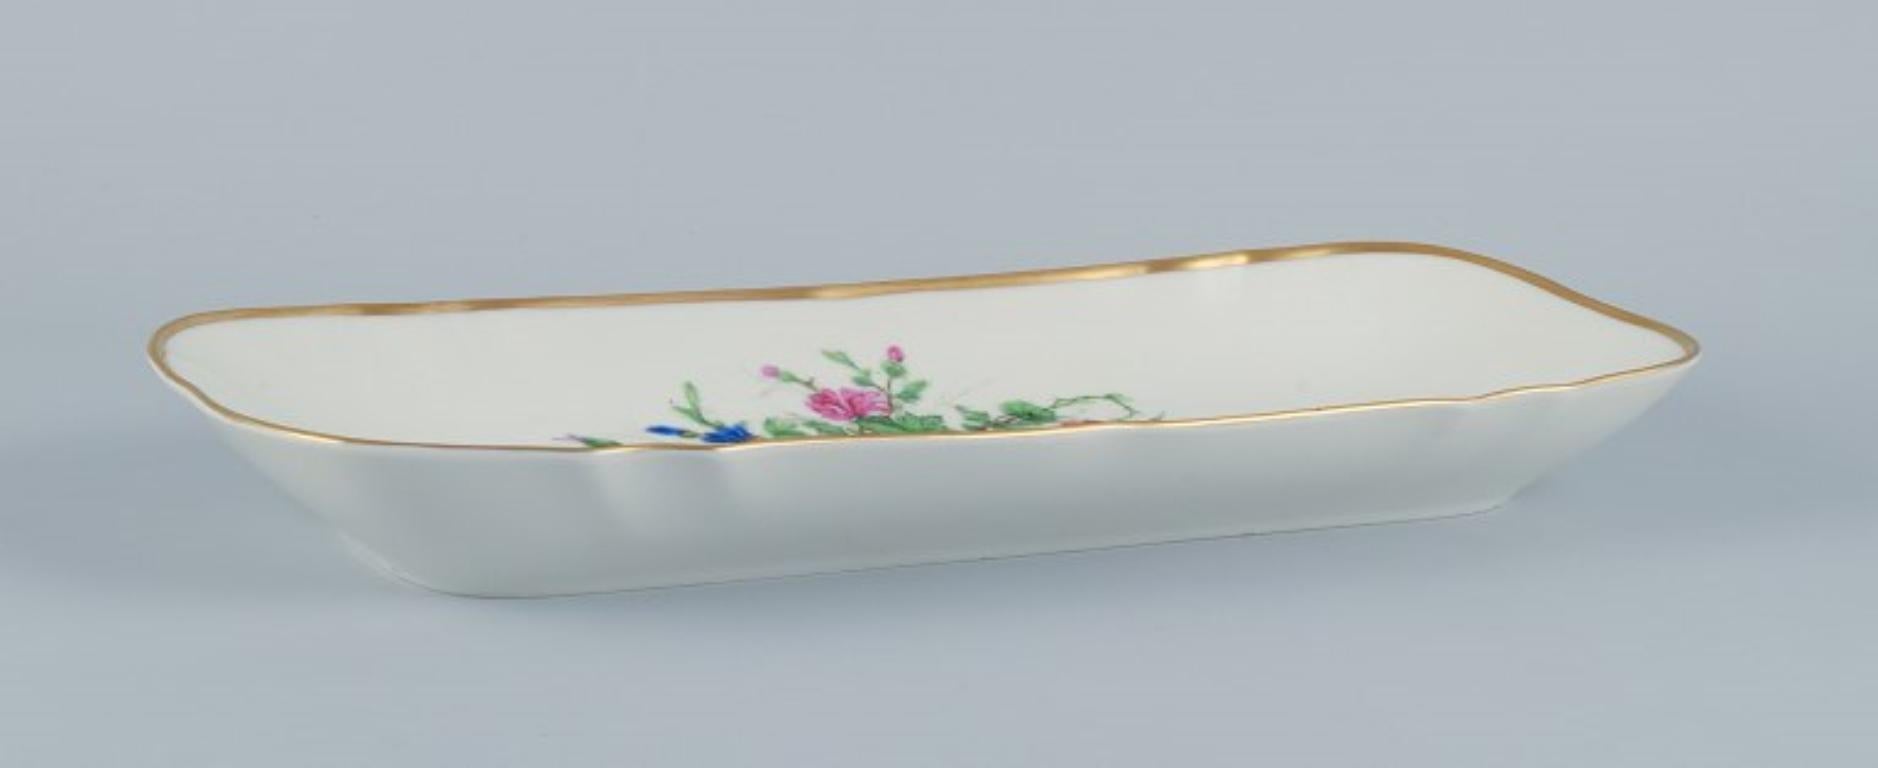 Bing & Grondahl, large rectangular platter hand-painted with polychrome flower motifs and gold trim.
Approximately from the 1920s.
Marked.
First factory quality.
Perfect condition.
Dimensions: Length 38.0 cm x Width 15.5 cm x Height 3.9 cm.